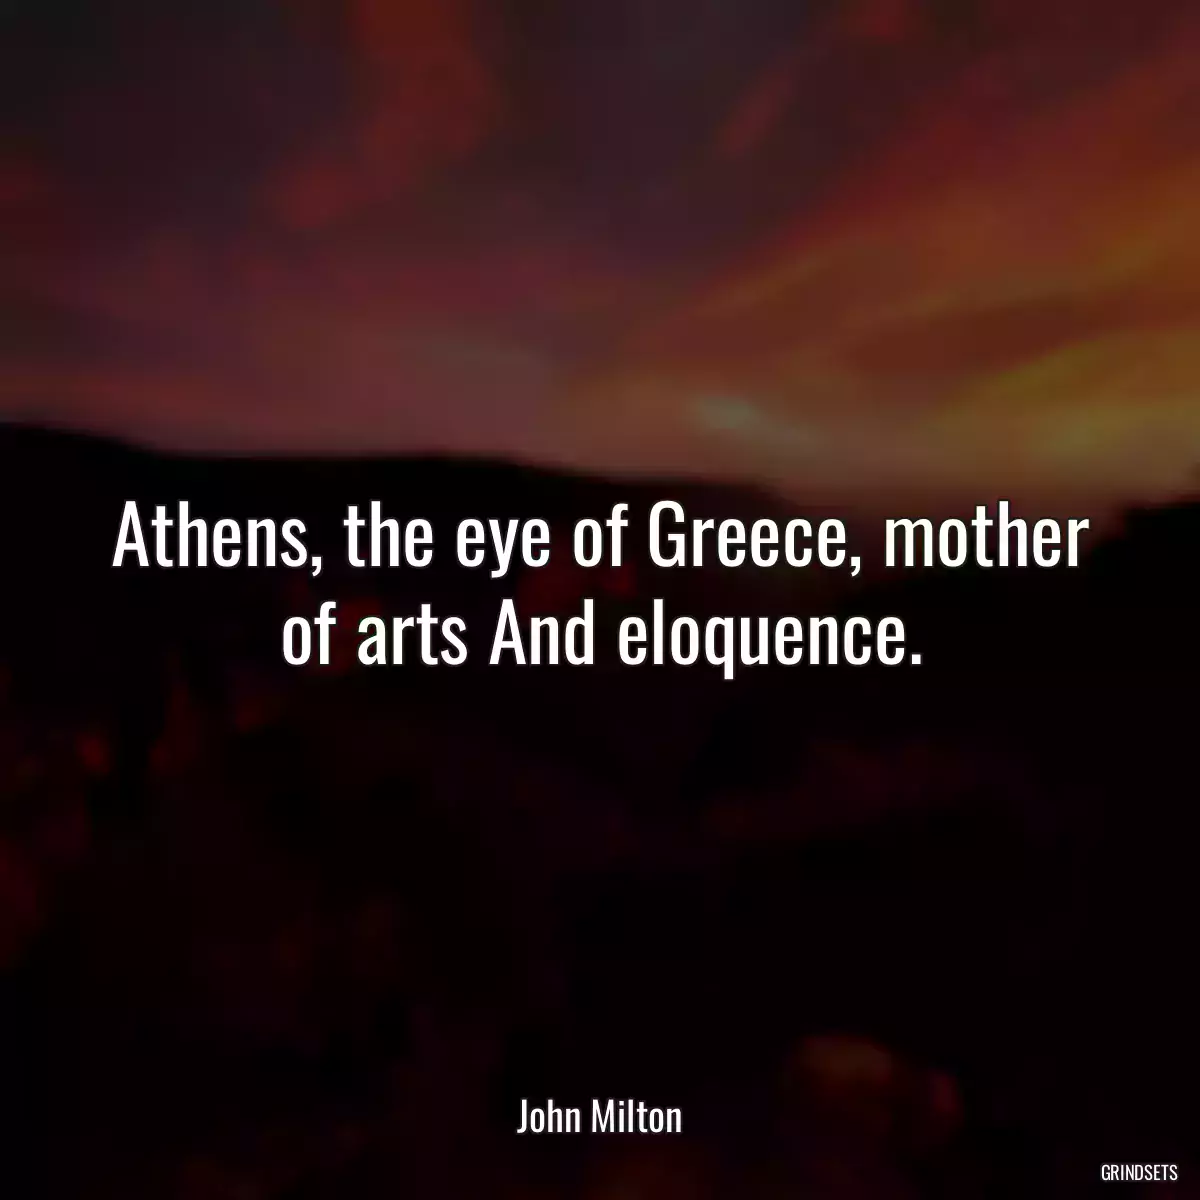 Athens, the eye of Greece, mother of arts And eloquence.